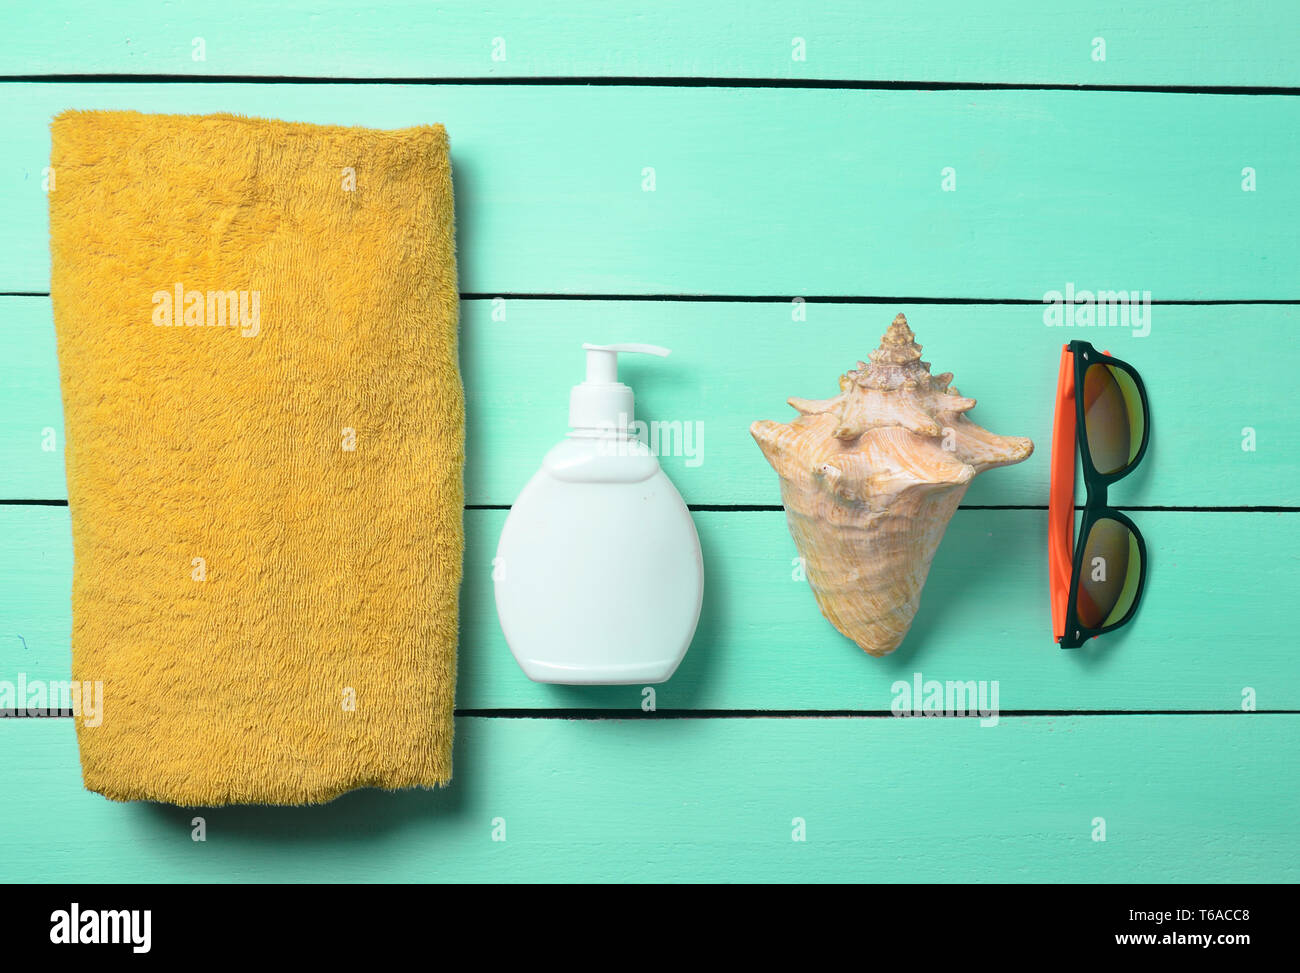 Products and accessories for relaxing on the beach: sunblock, towel, sunglasses, shell on a turquoise wooden background. The concept of the resort. Stock Photo